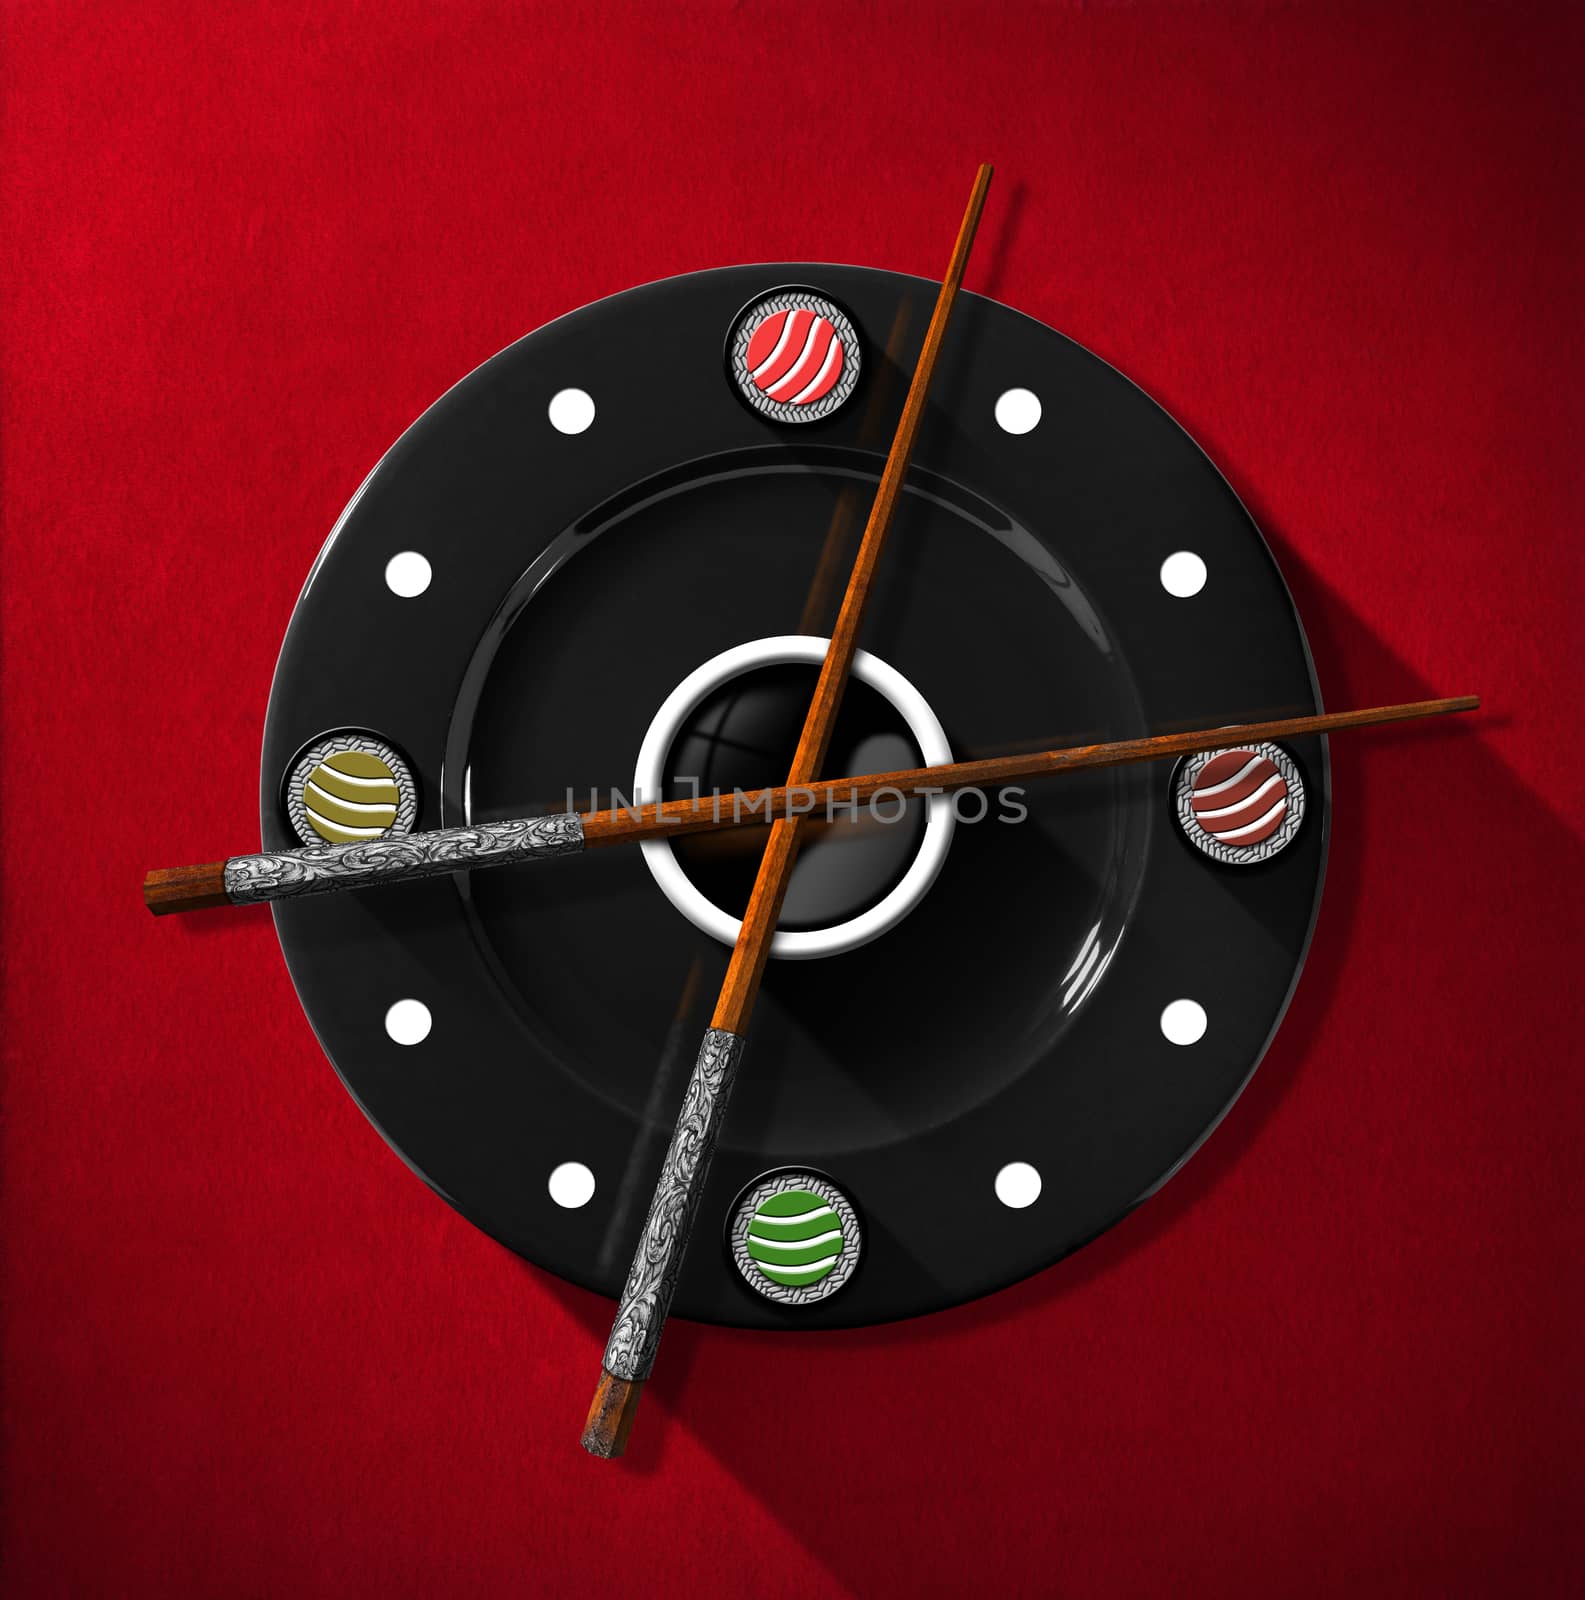 Clock composed by a black plate with wooden and silver chopsticks in the place of the clock hands and four sushi rolls. On a red velvet background